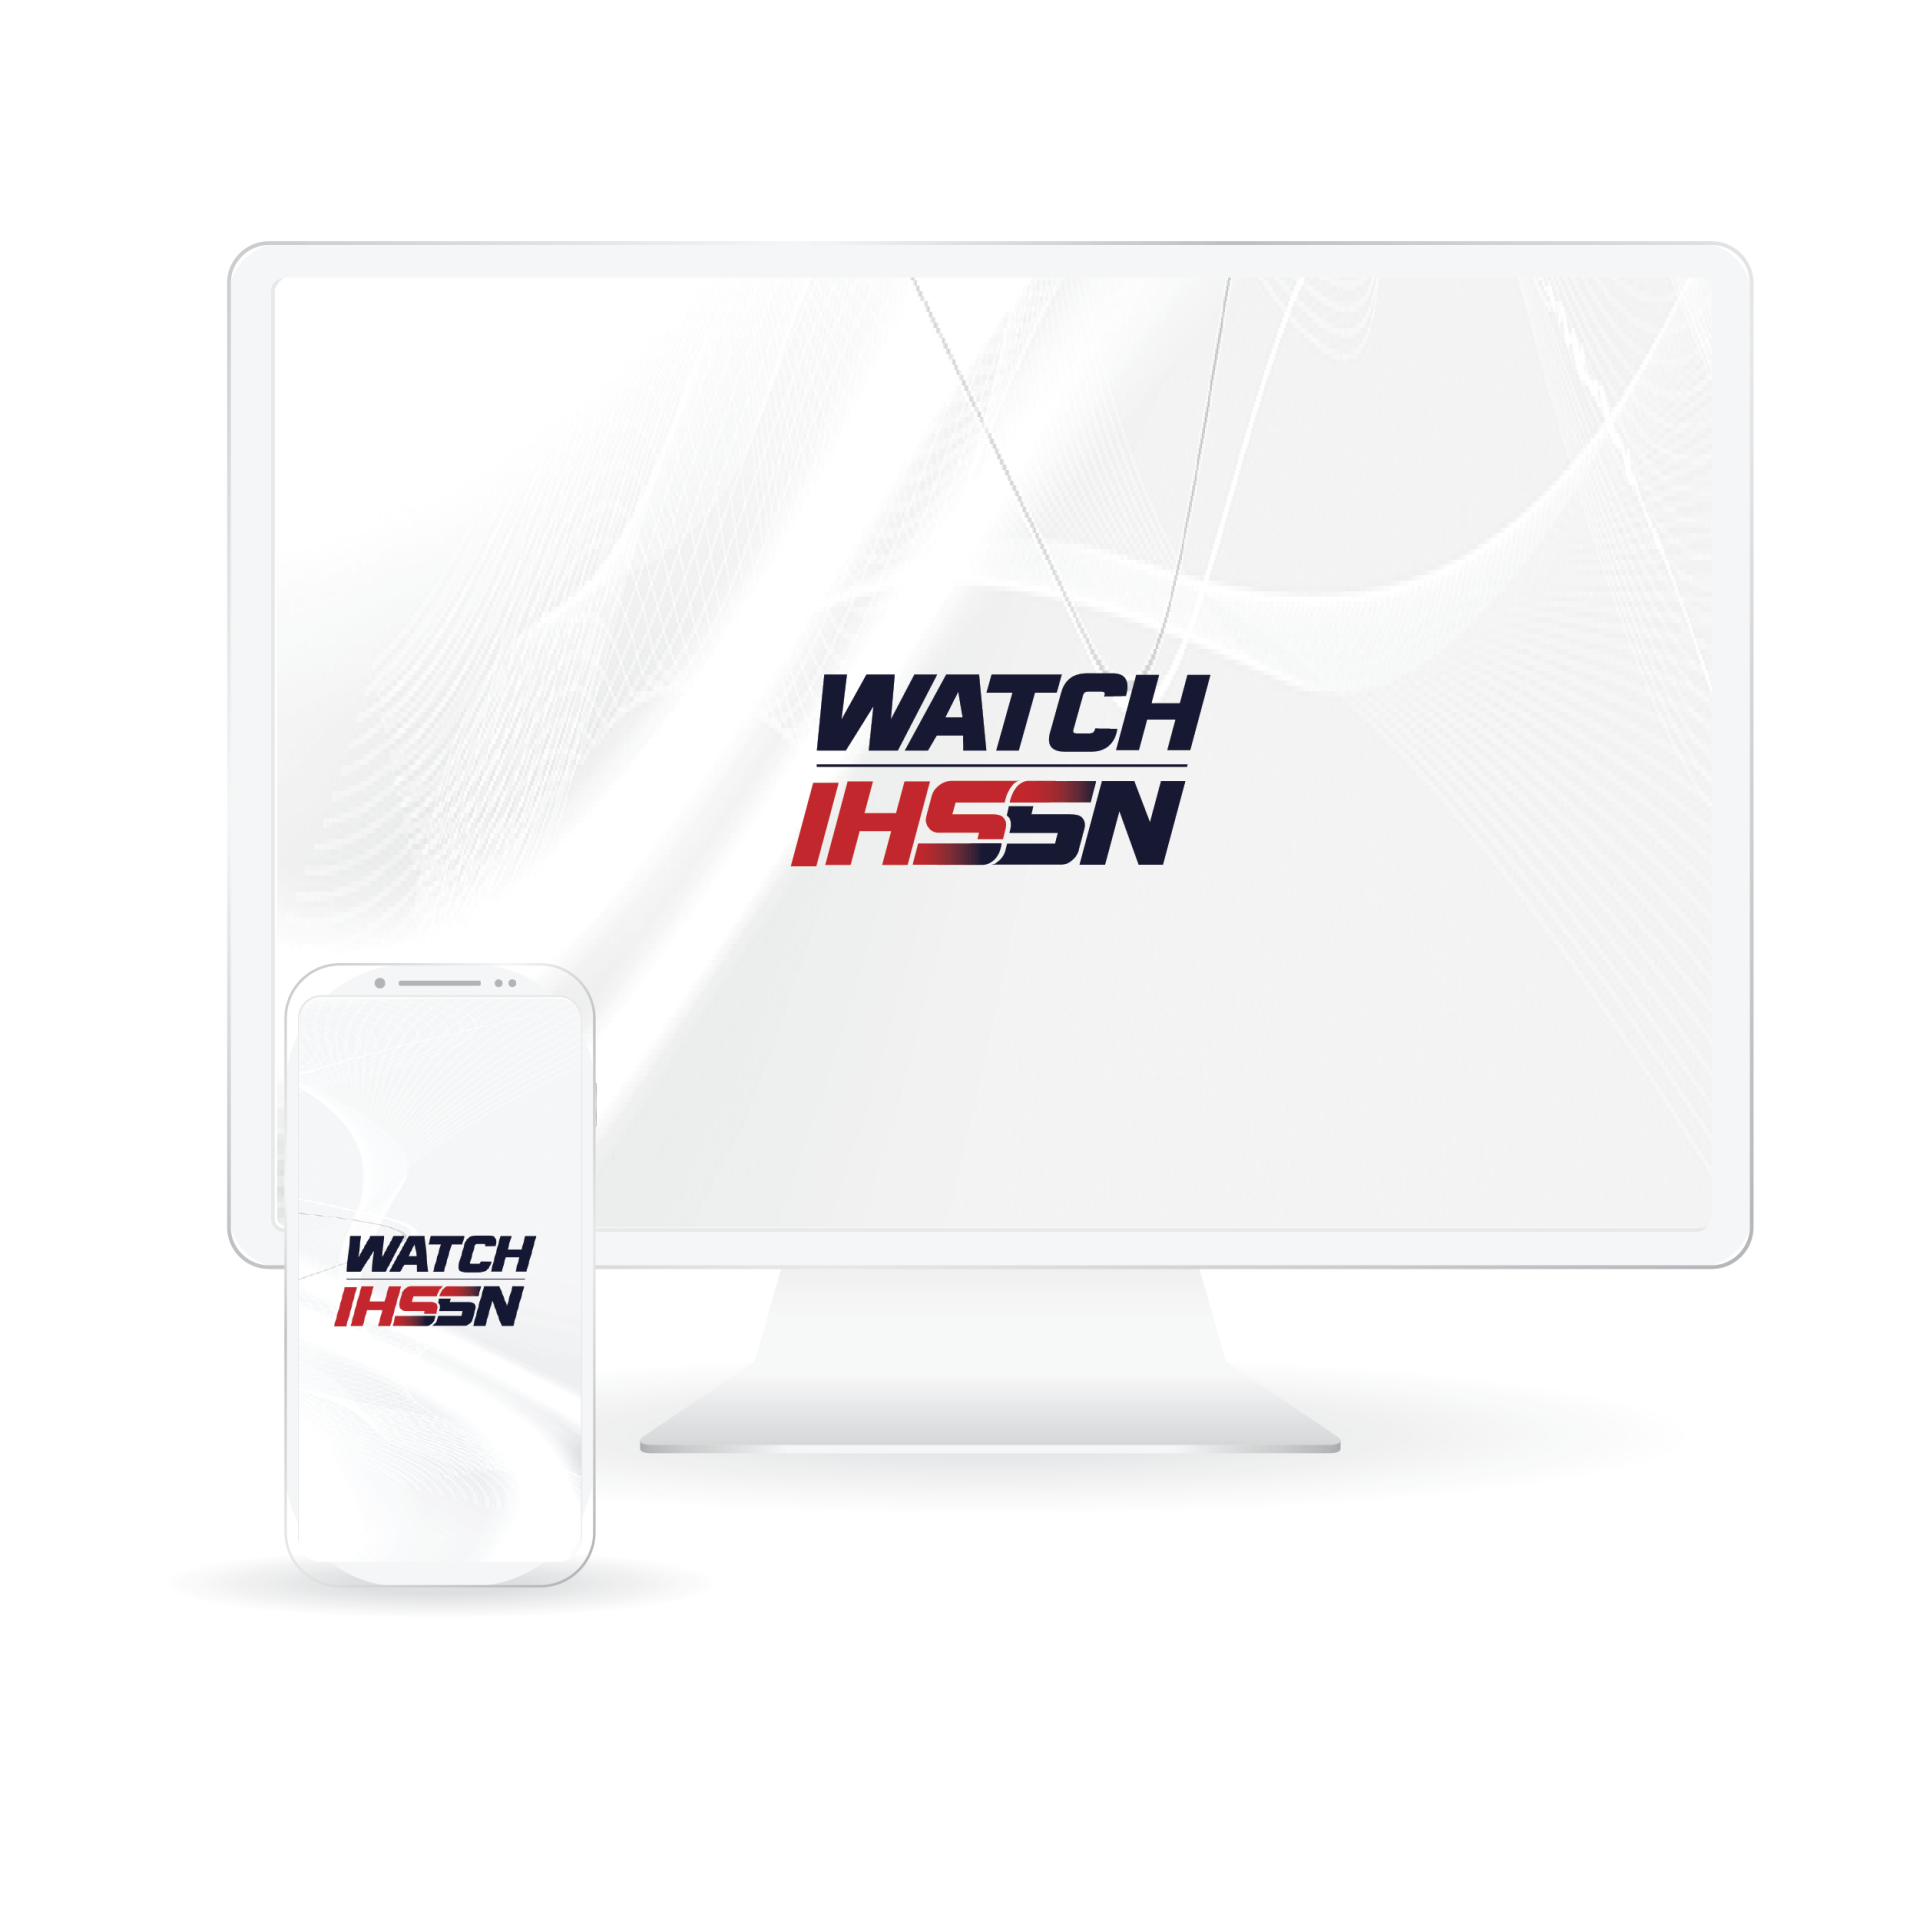 A computer monitor and a cell phone with the watch ihssn logo on them.